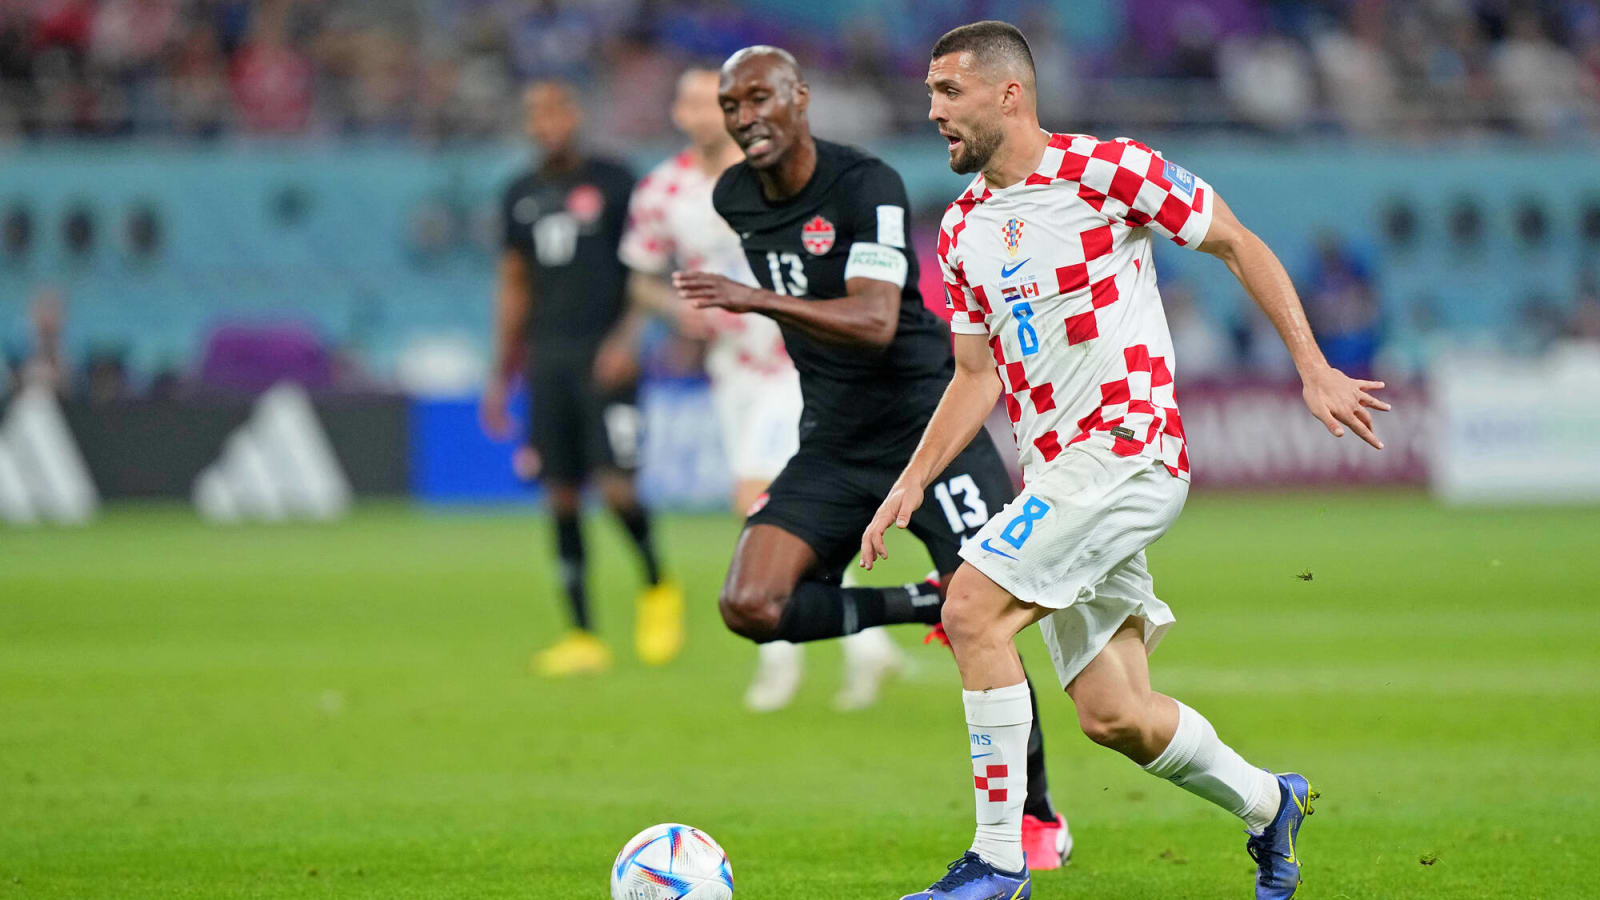 City’s Croatian midfielder has made his own impression at Manchester City